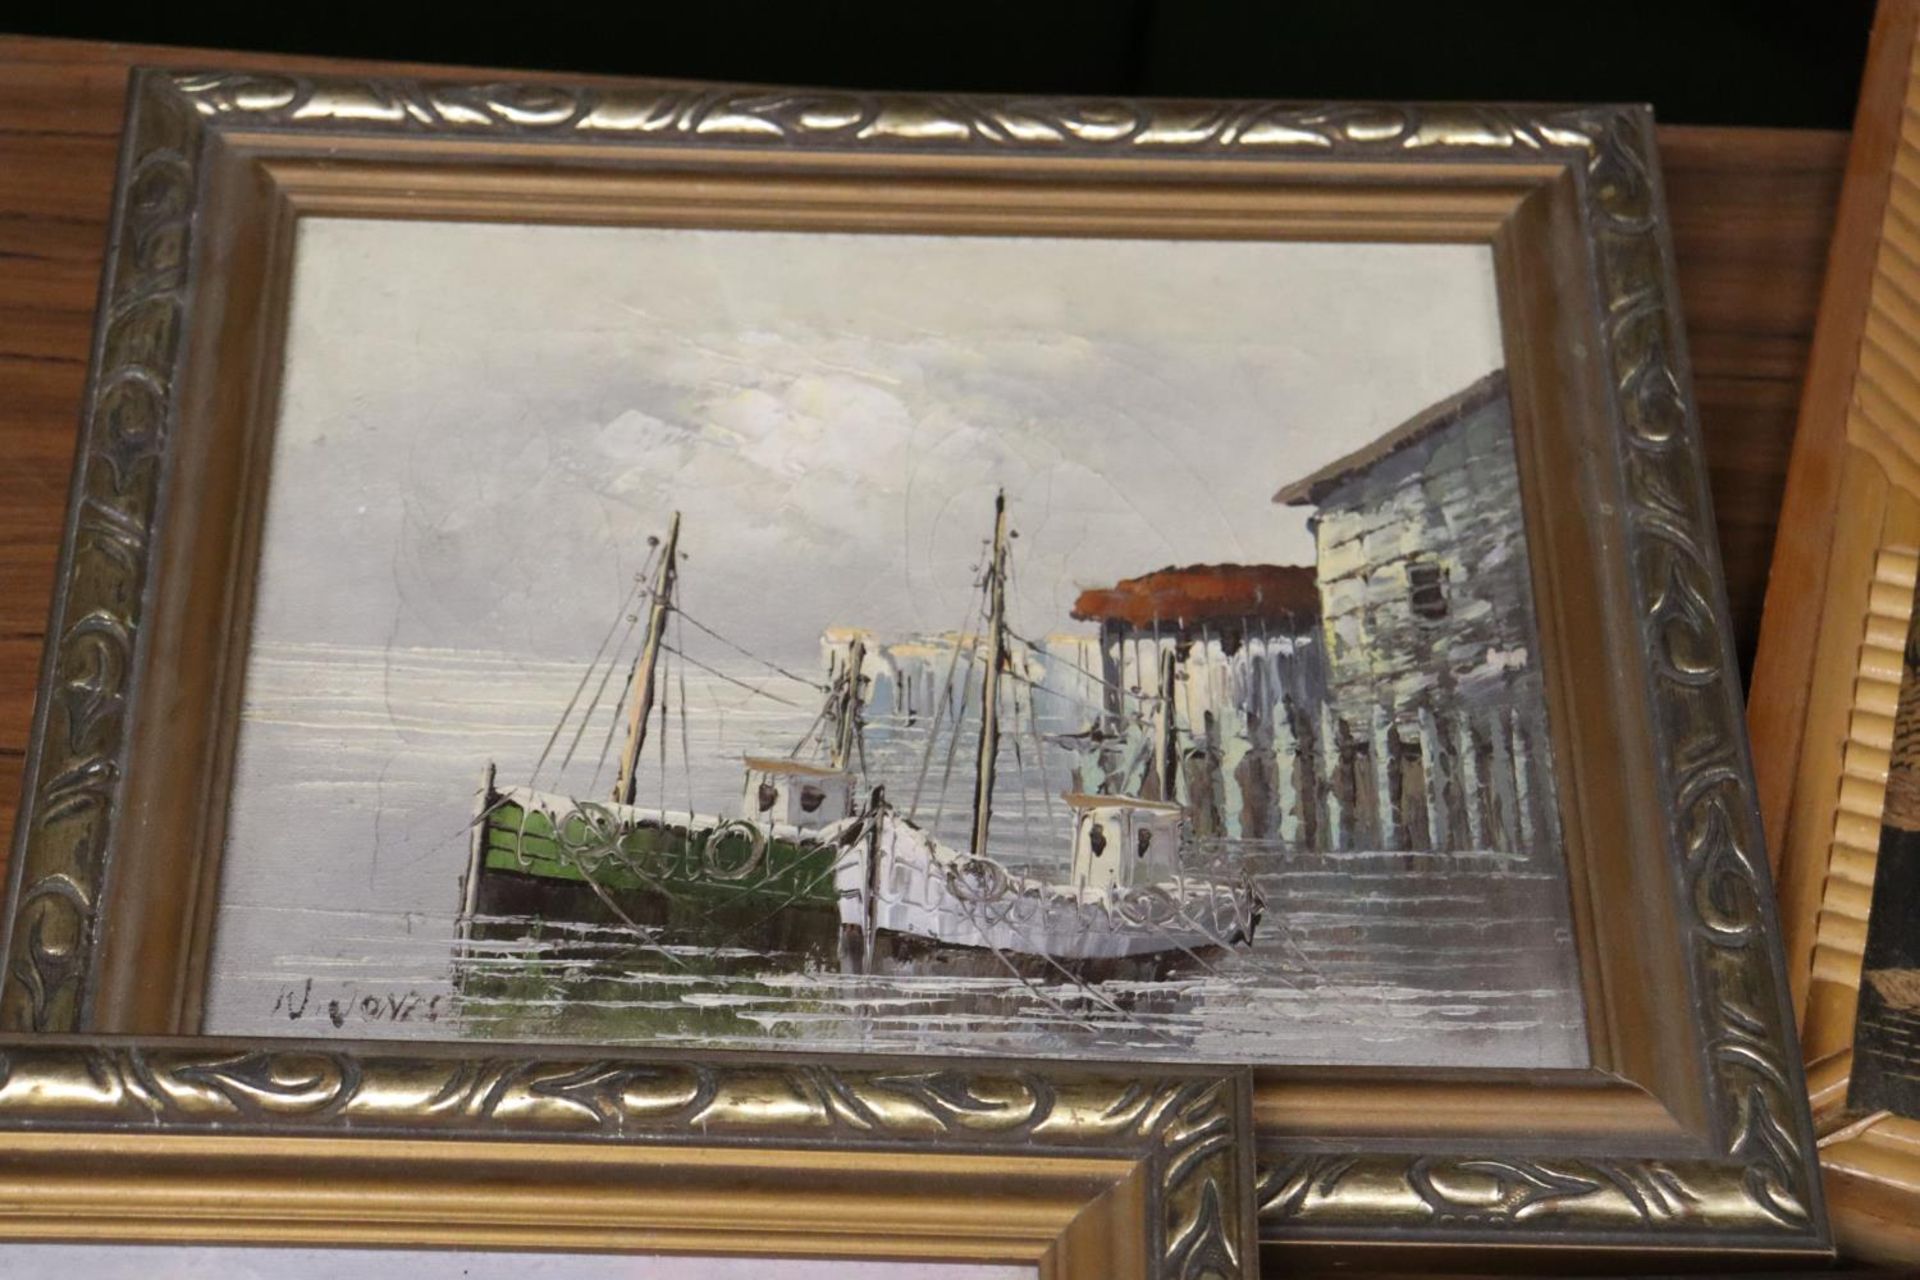 TWO FRAMED OILS ON CANVAS OF BOATS, ONE A/F, A FRAMED 3-D IMAGE OF A FISHERMAN IN A BOAT, PLUS A - Image 3 of 5